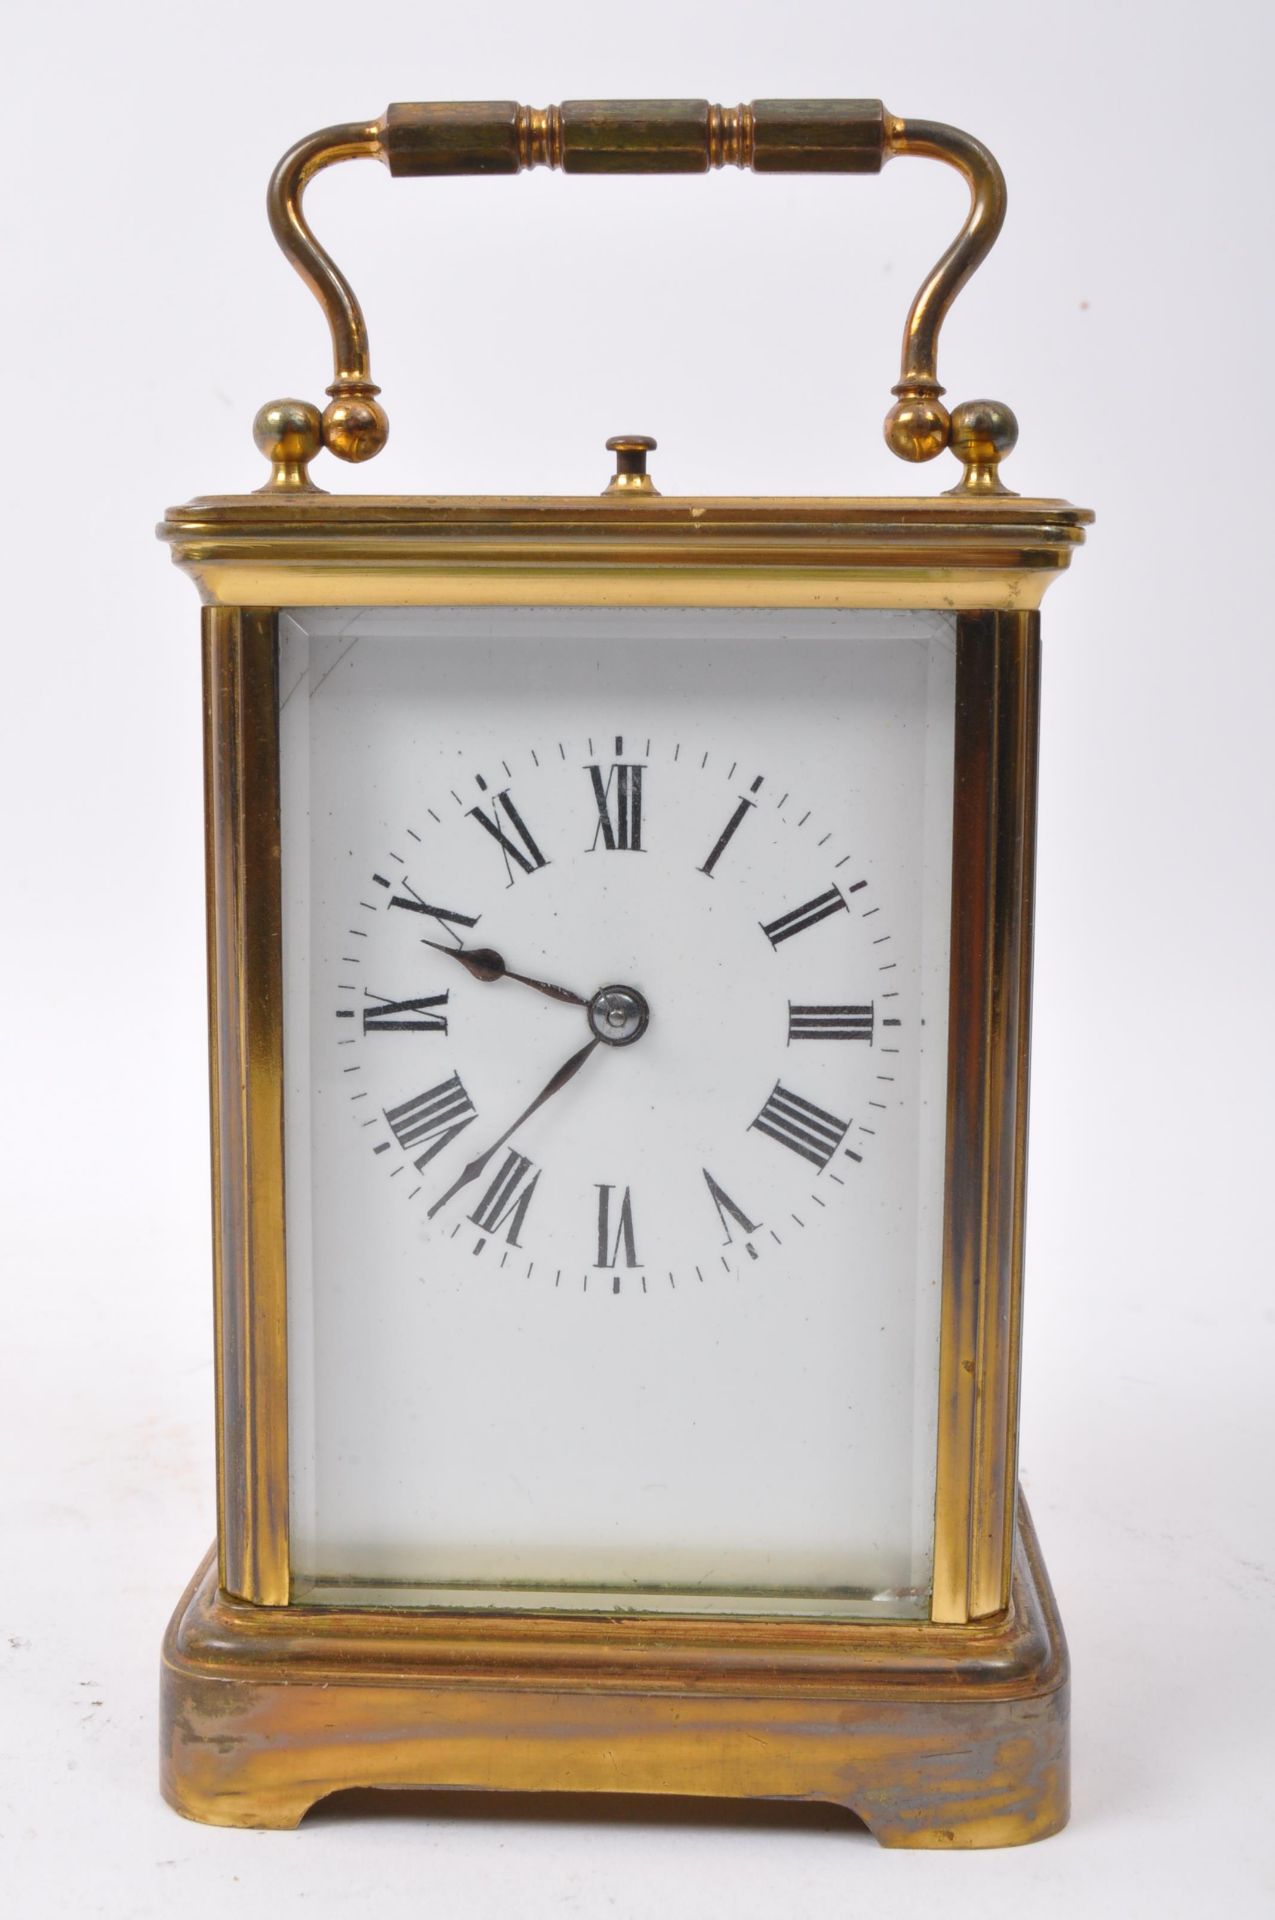 EARLY 20TH CENTURY BRASS CARRIAGE CLOCK - Image 2 of 5